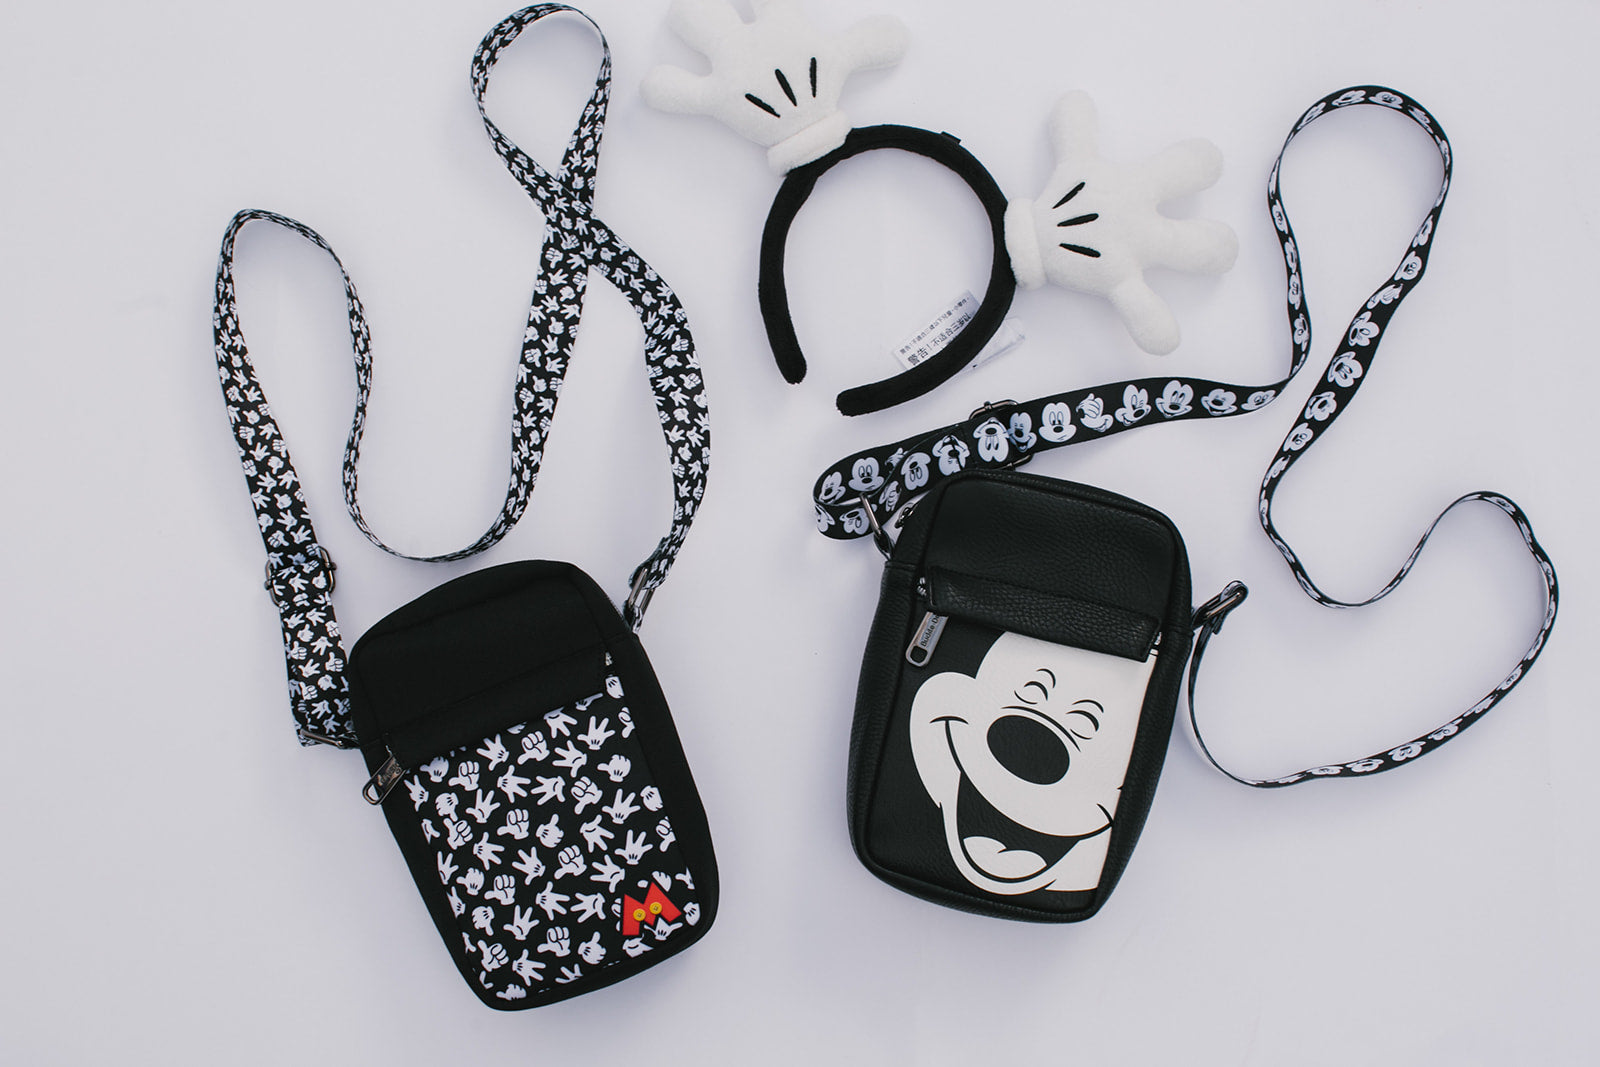 Mickey Mouse Crossbody Bags Available for May 2021 Pre-Order!